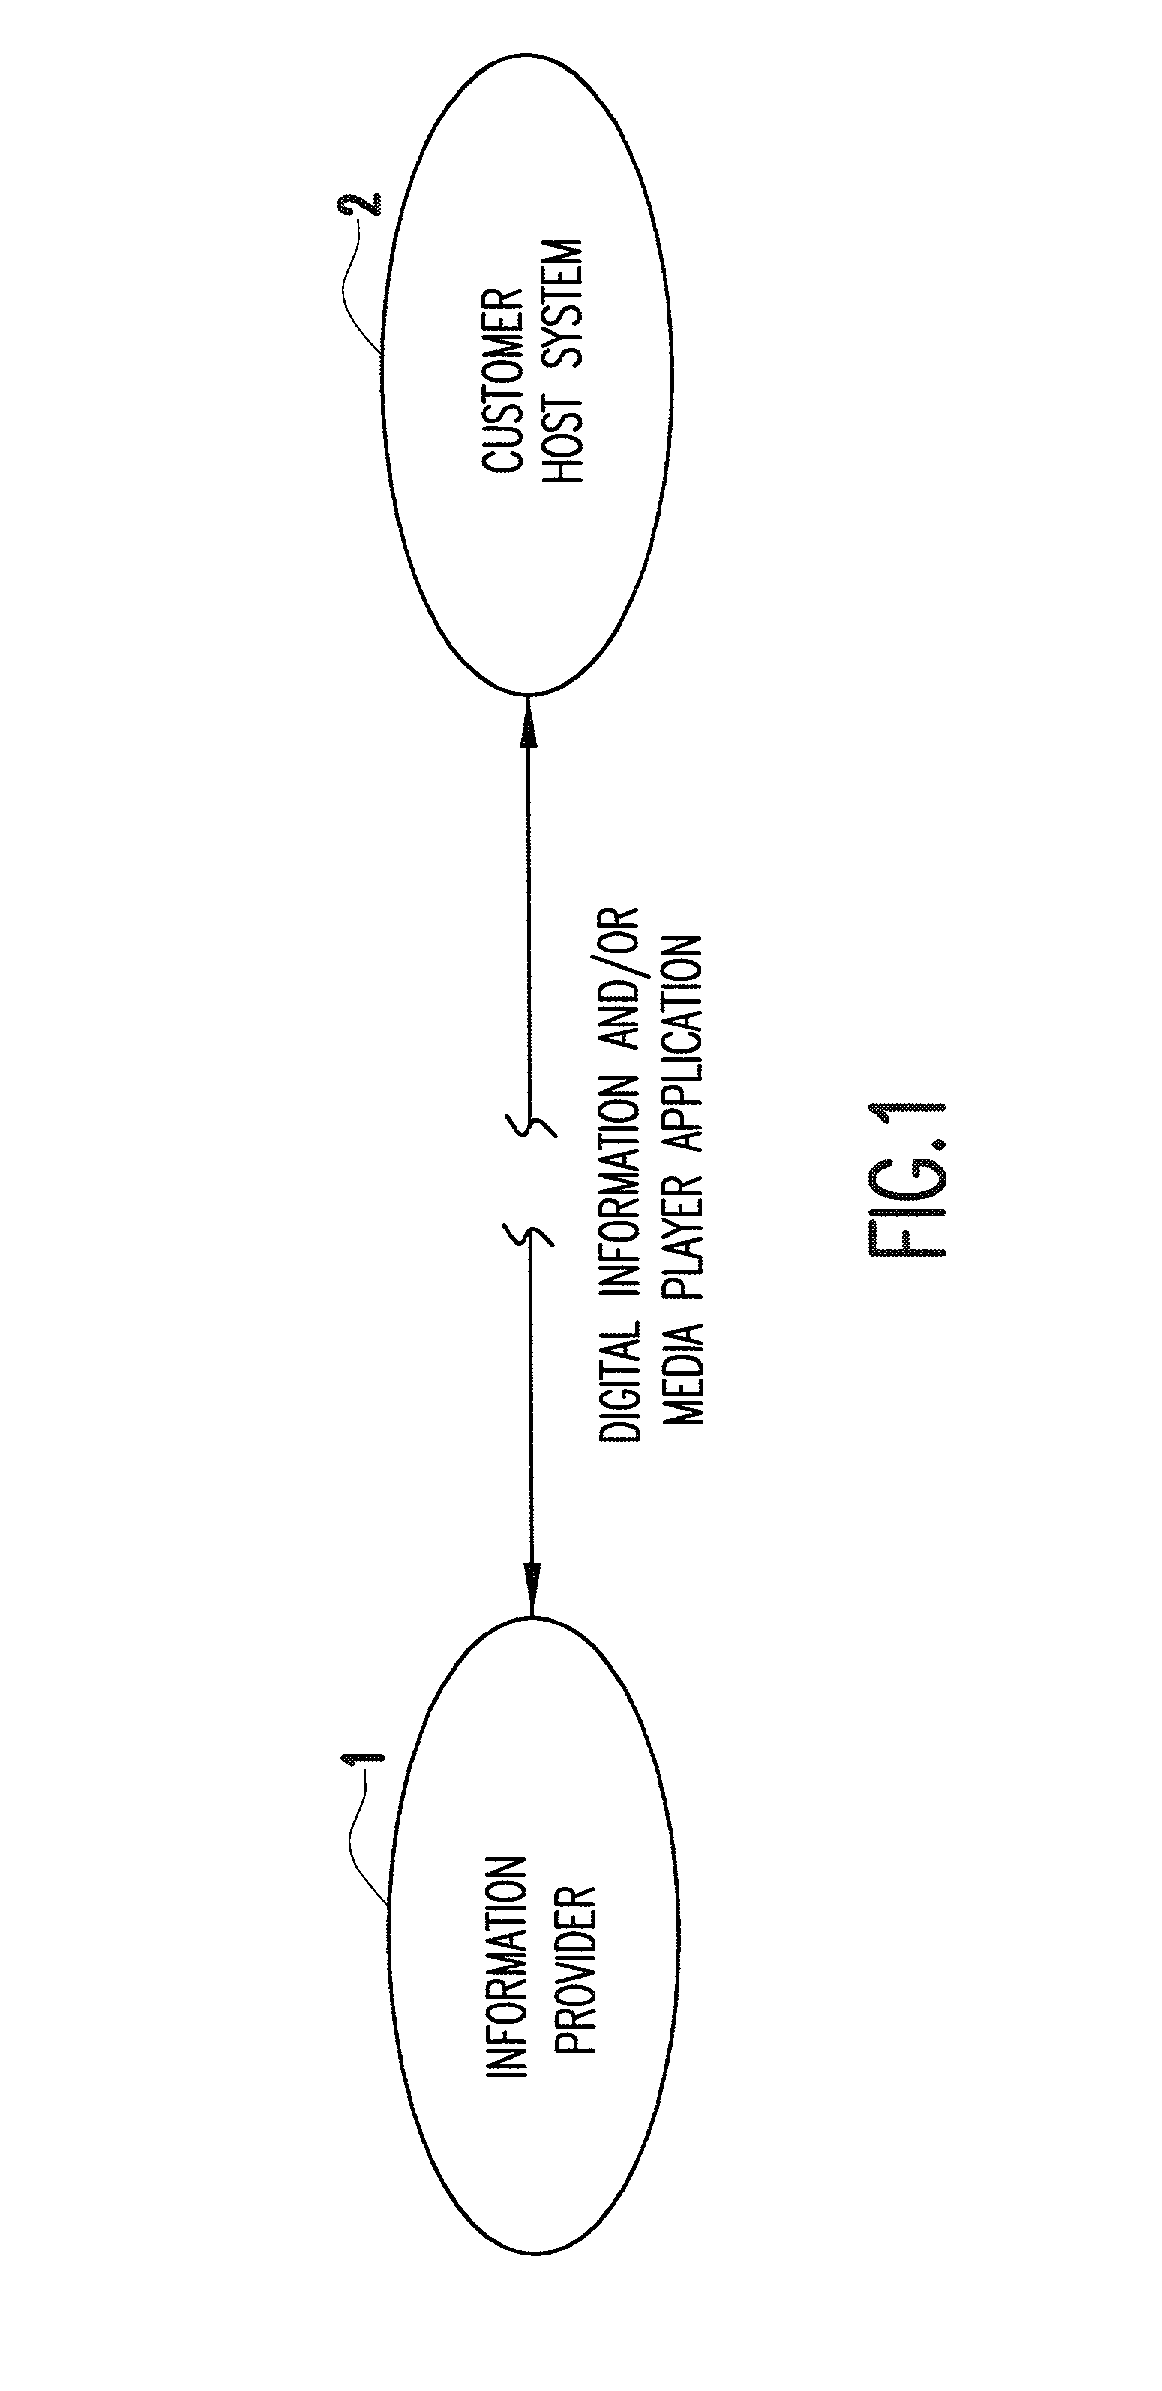 System and method for secure distribution and evaluation of compressed digital information